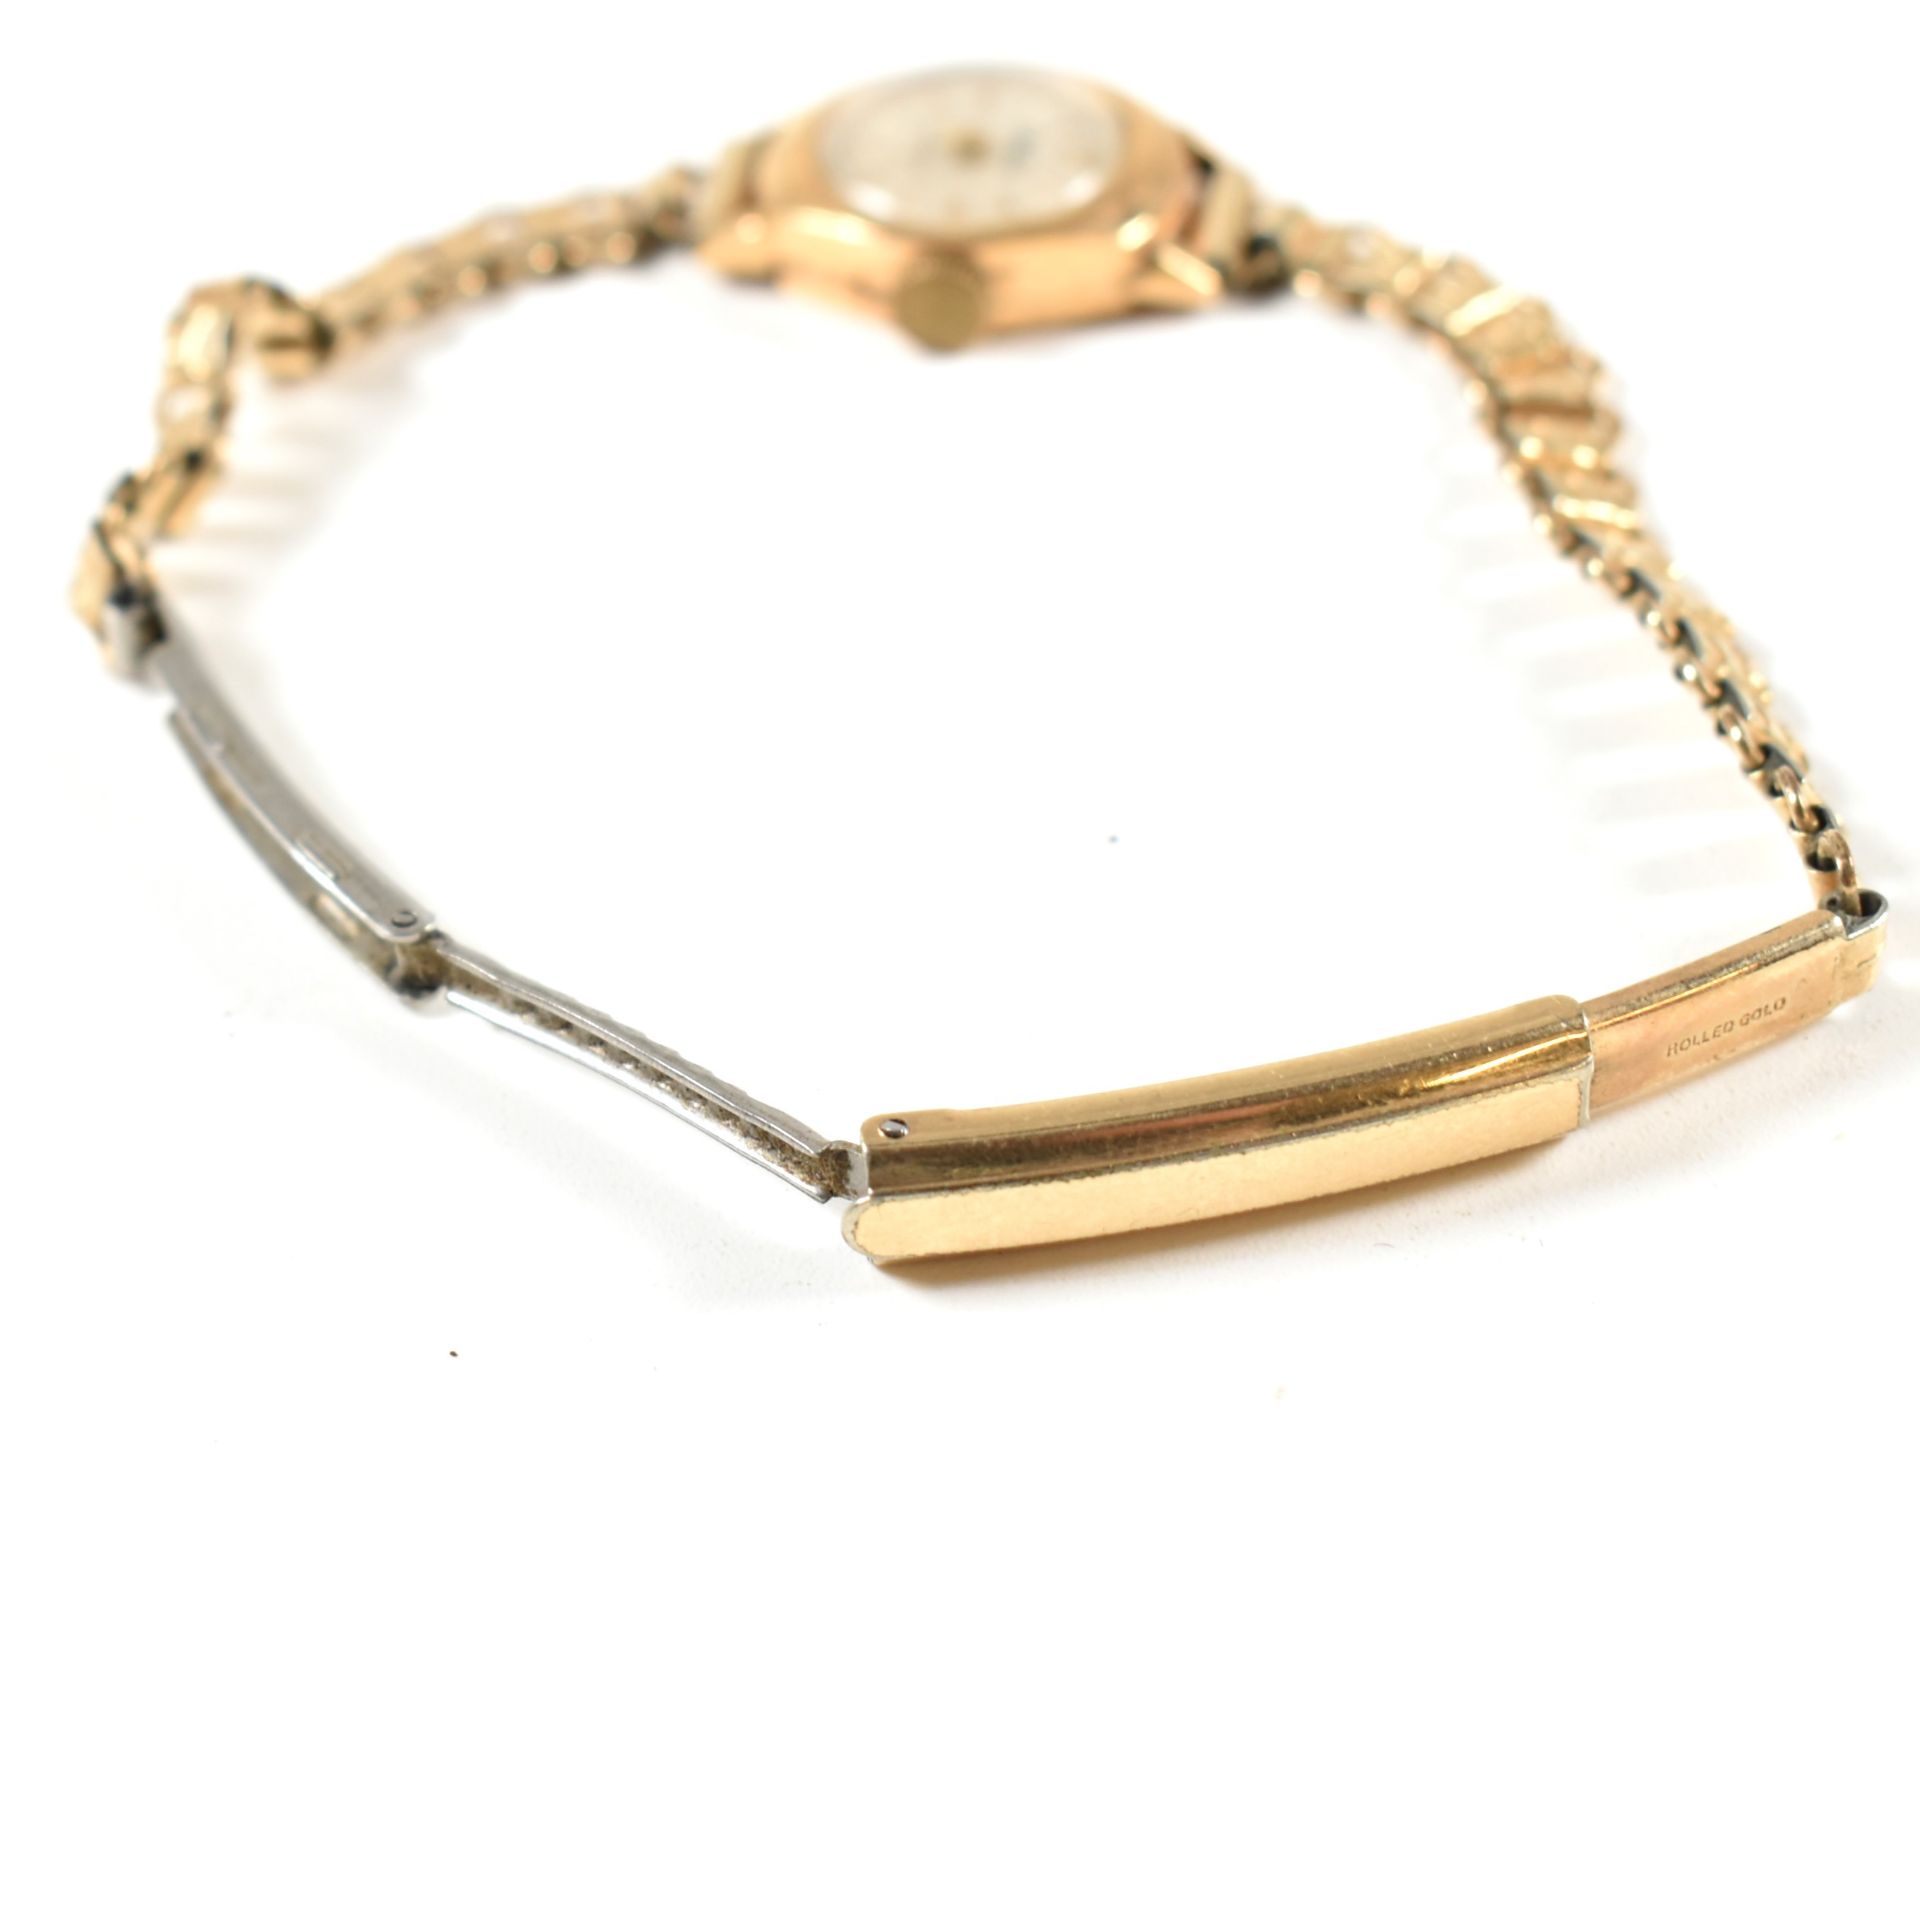 18CT GOLD LADIES WRISTWATCH ON ROLLED GOLD BRACELET STRAP - Image 4 of 5